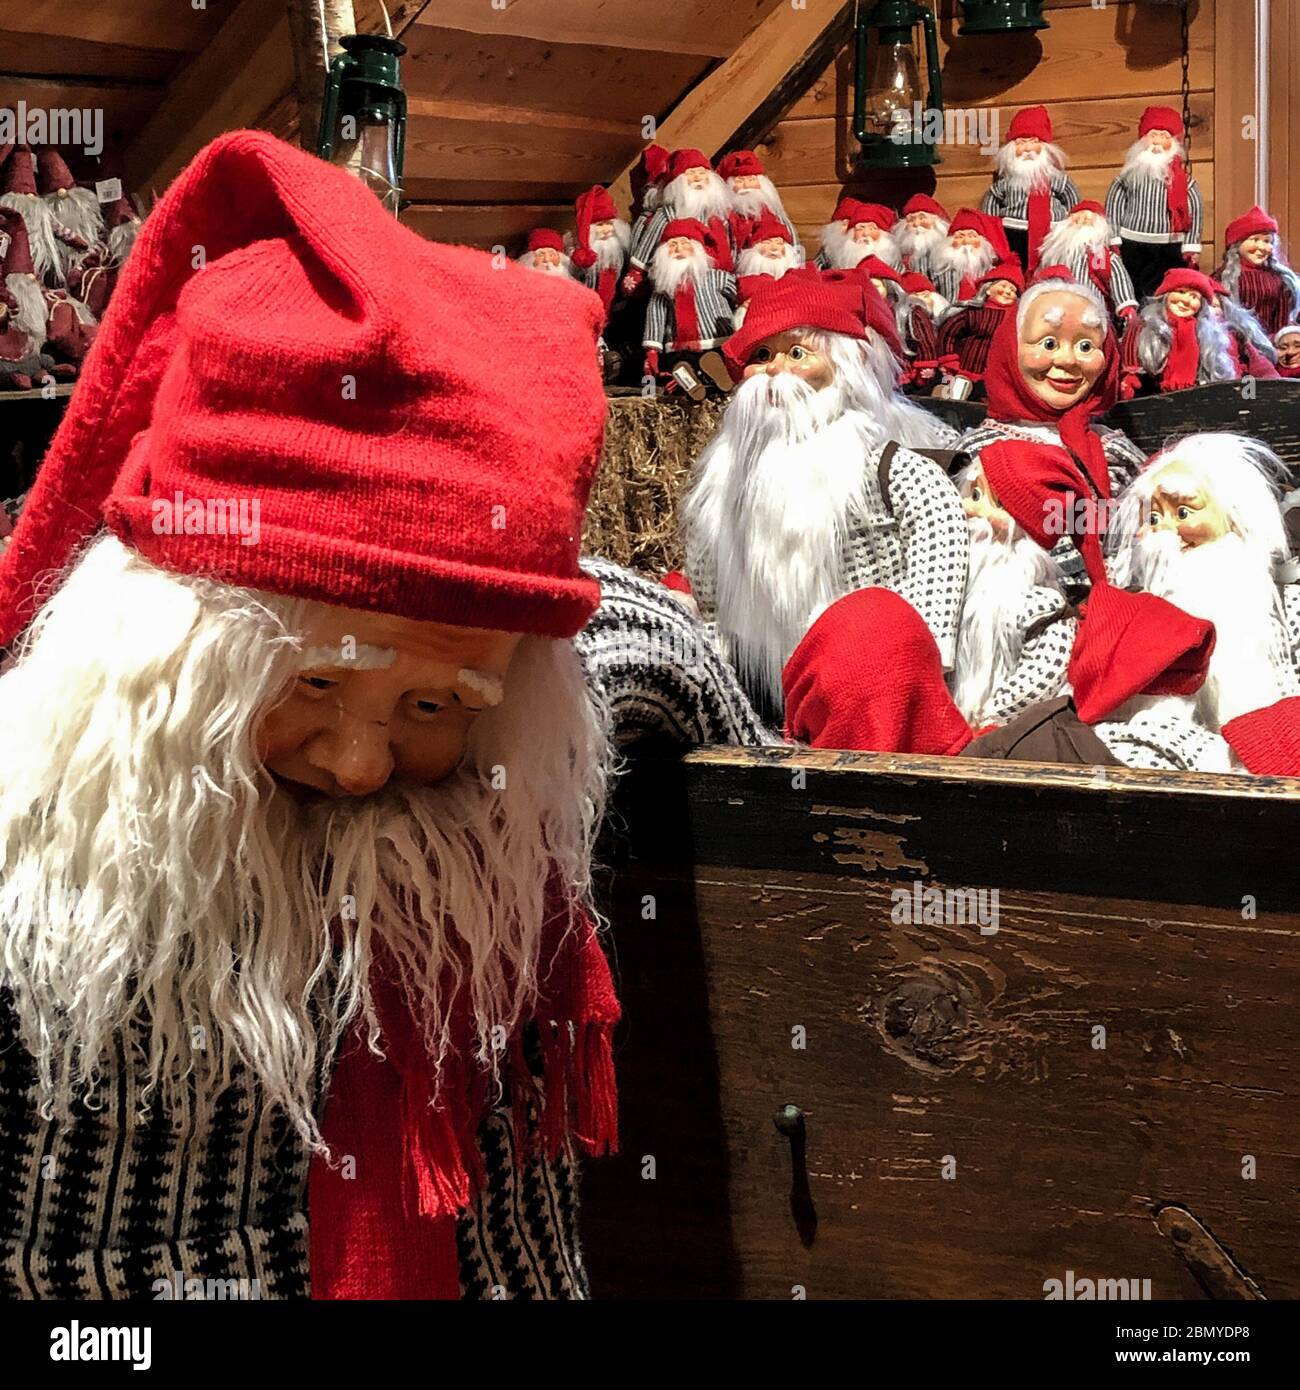 Collection Of Traditional Norwegian Santa Dolls And Helpers Wearing Authentic Red Hats Stock Photo